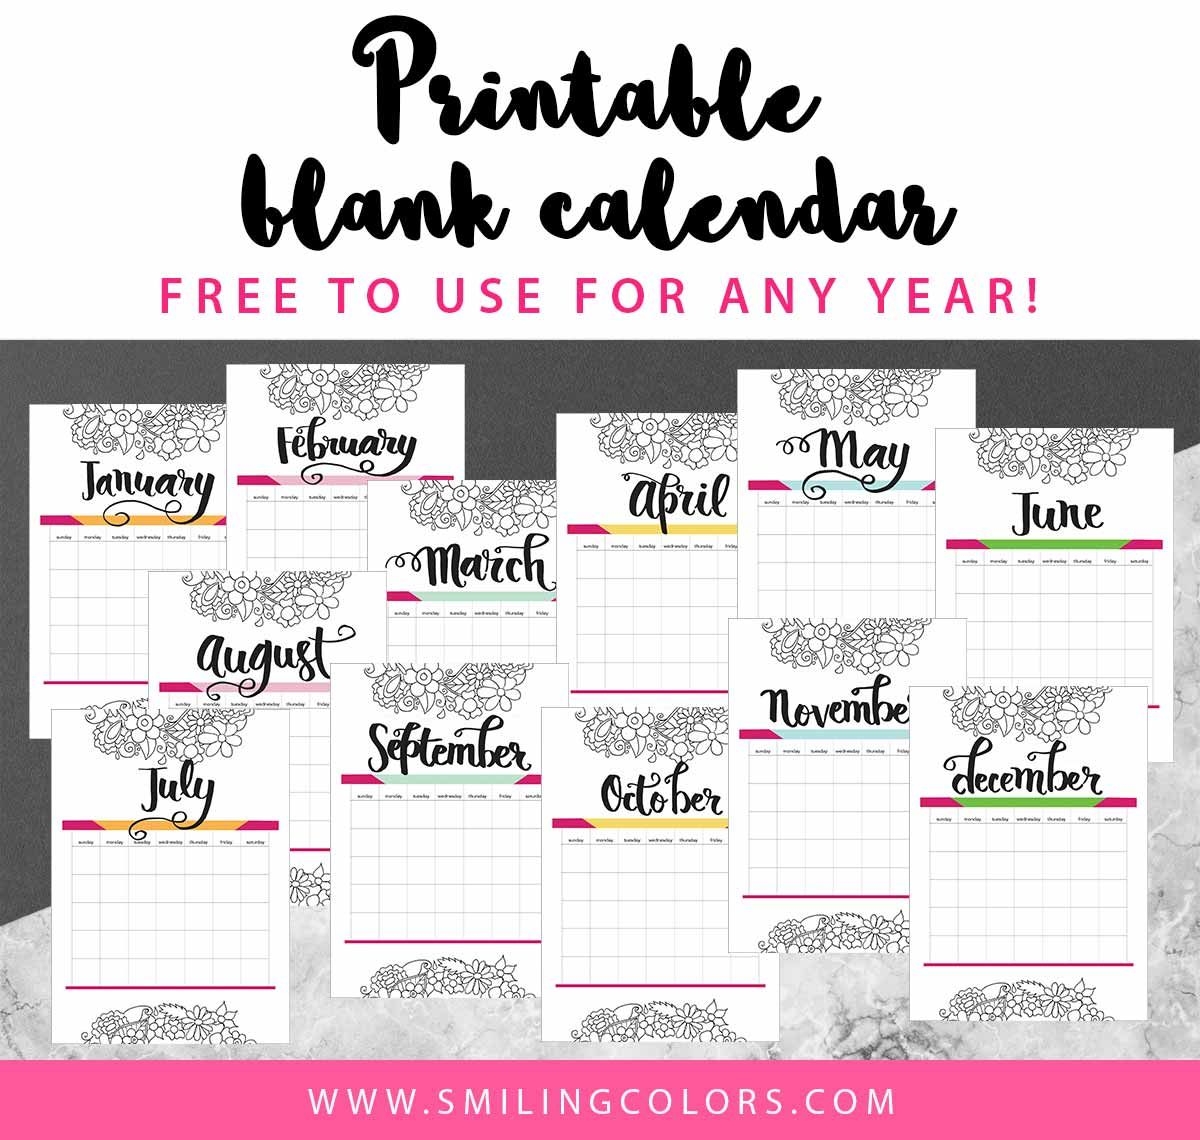 printable blank calendar free to use for any year